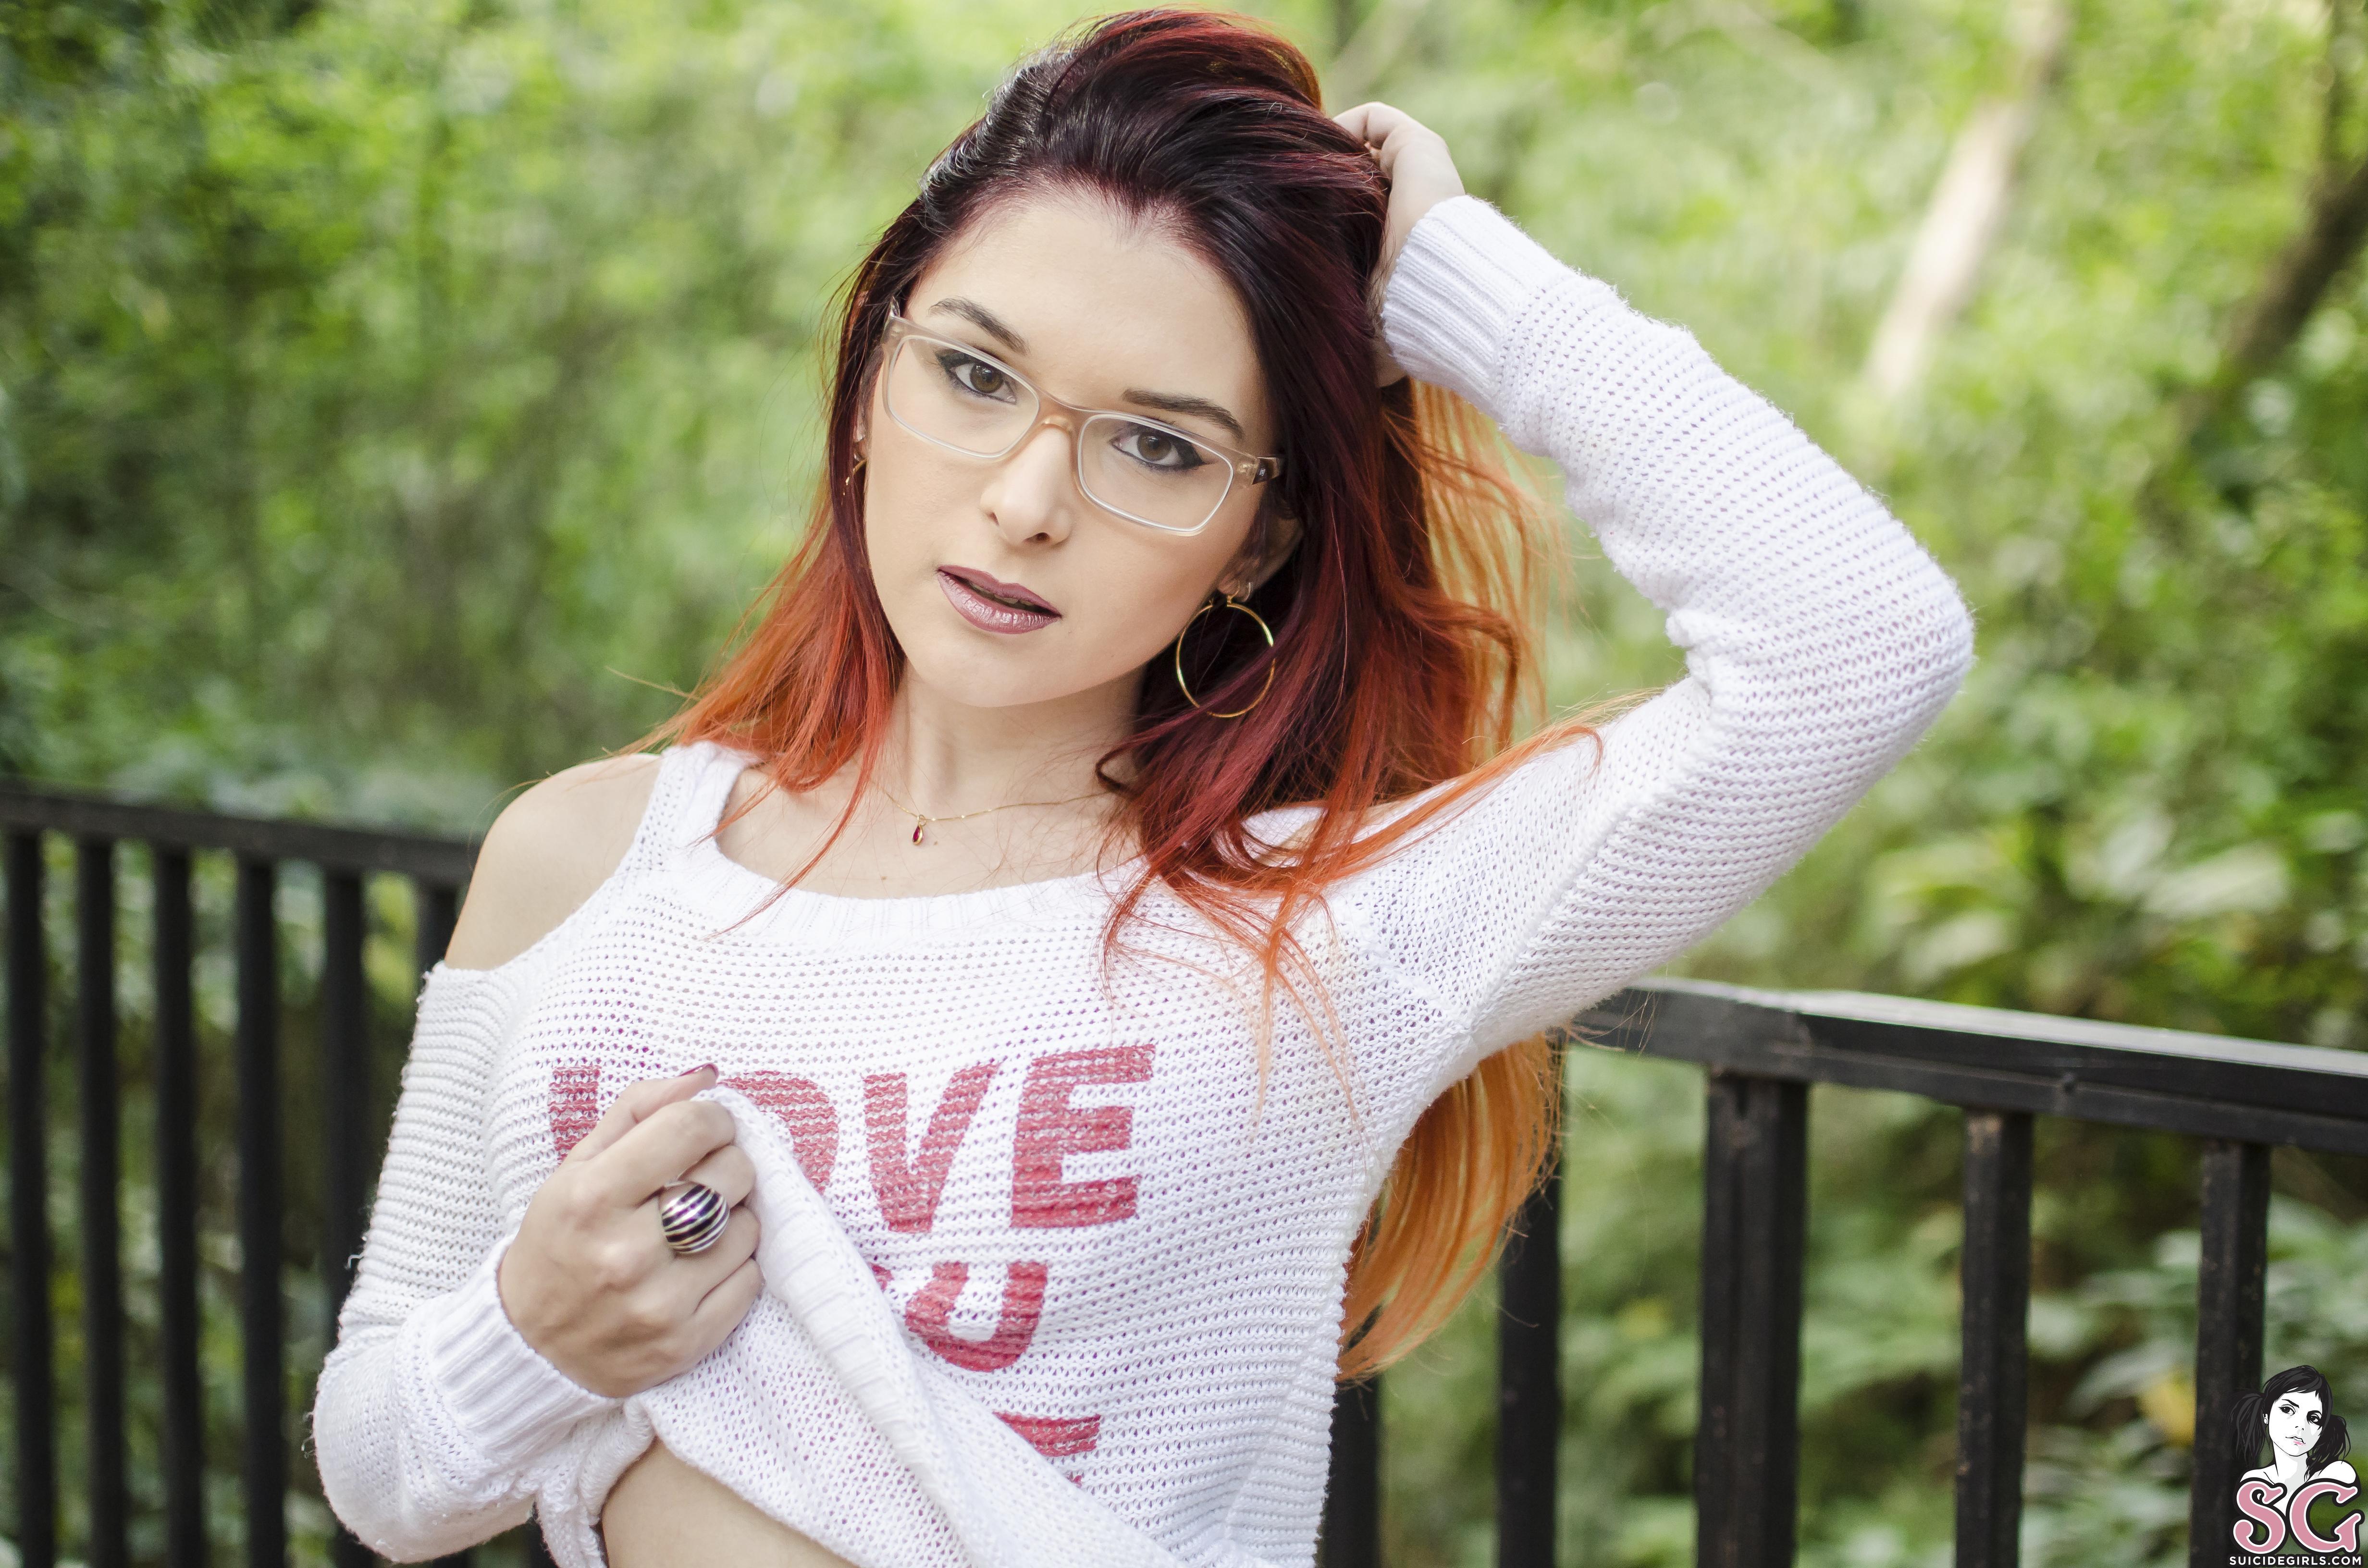 People 4928x3264 Cahpolly (SuicideGirls) glasses sweater Suicide Girls women women with glasses one arm up redhead dyed hair earring red lipstick makeup printed sweater rings watermarked women outdoors balcony white sweater looking at viewer model closeup